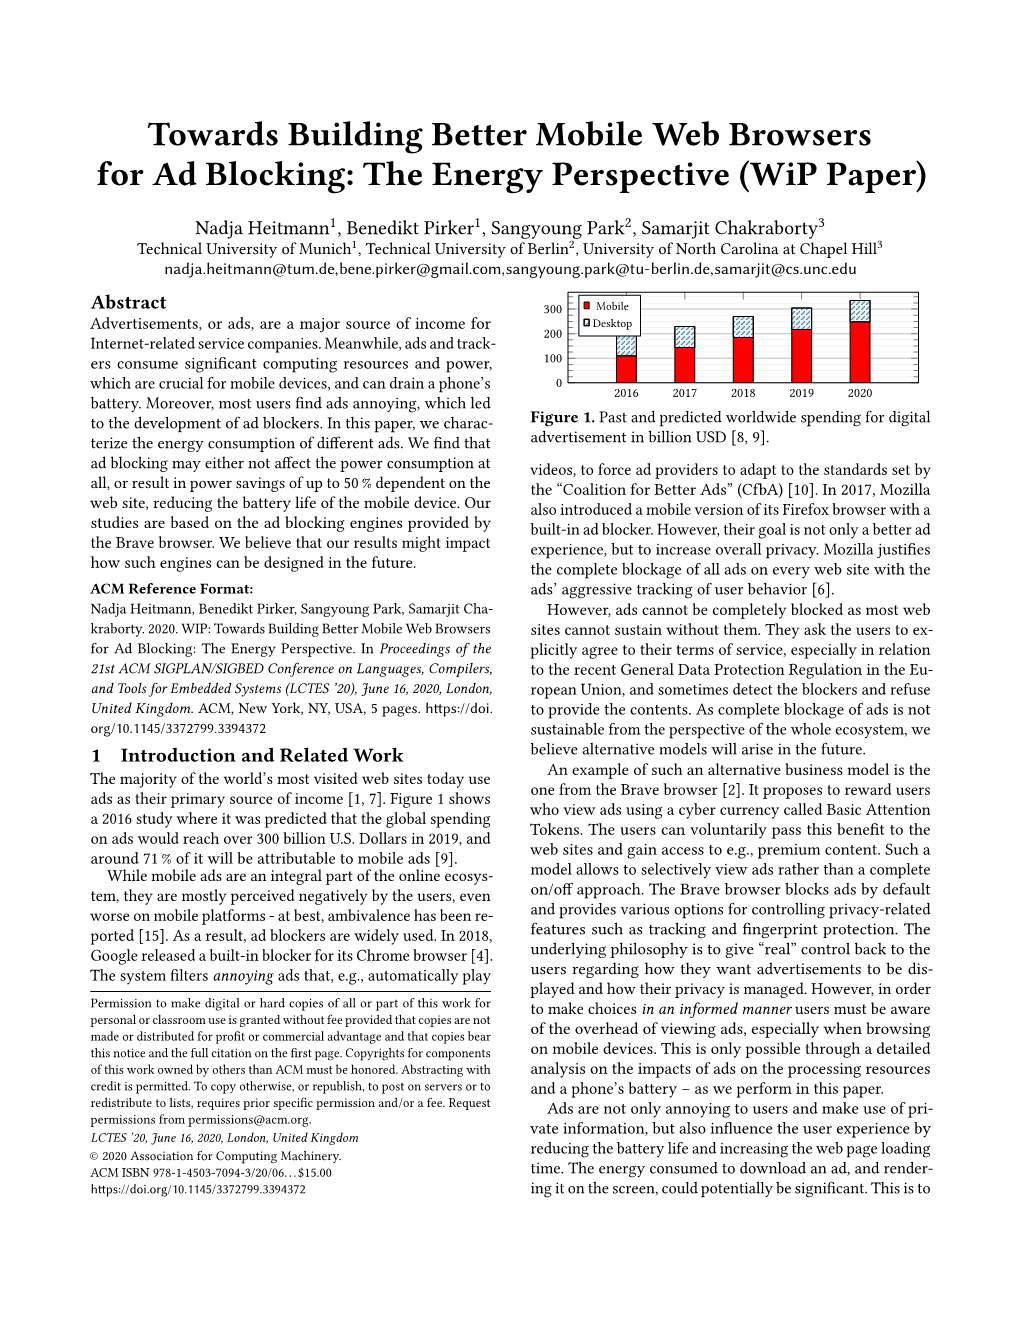 Towards Building Better Mobile Web Browsers for Ad Blocking: the Energy Perspective (Wip Paper)